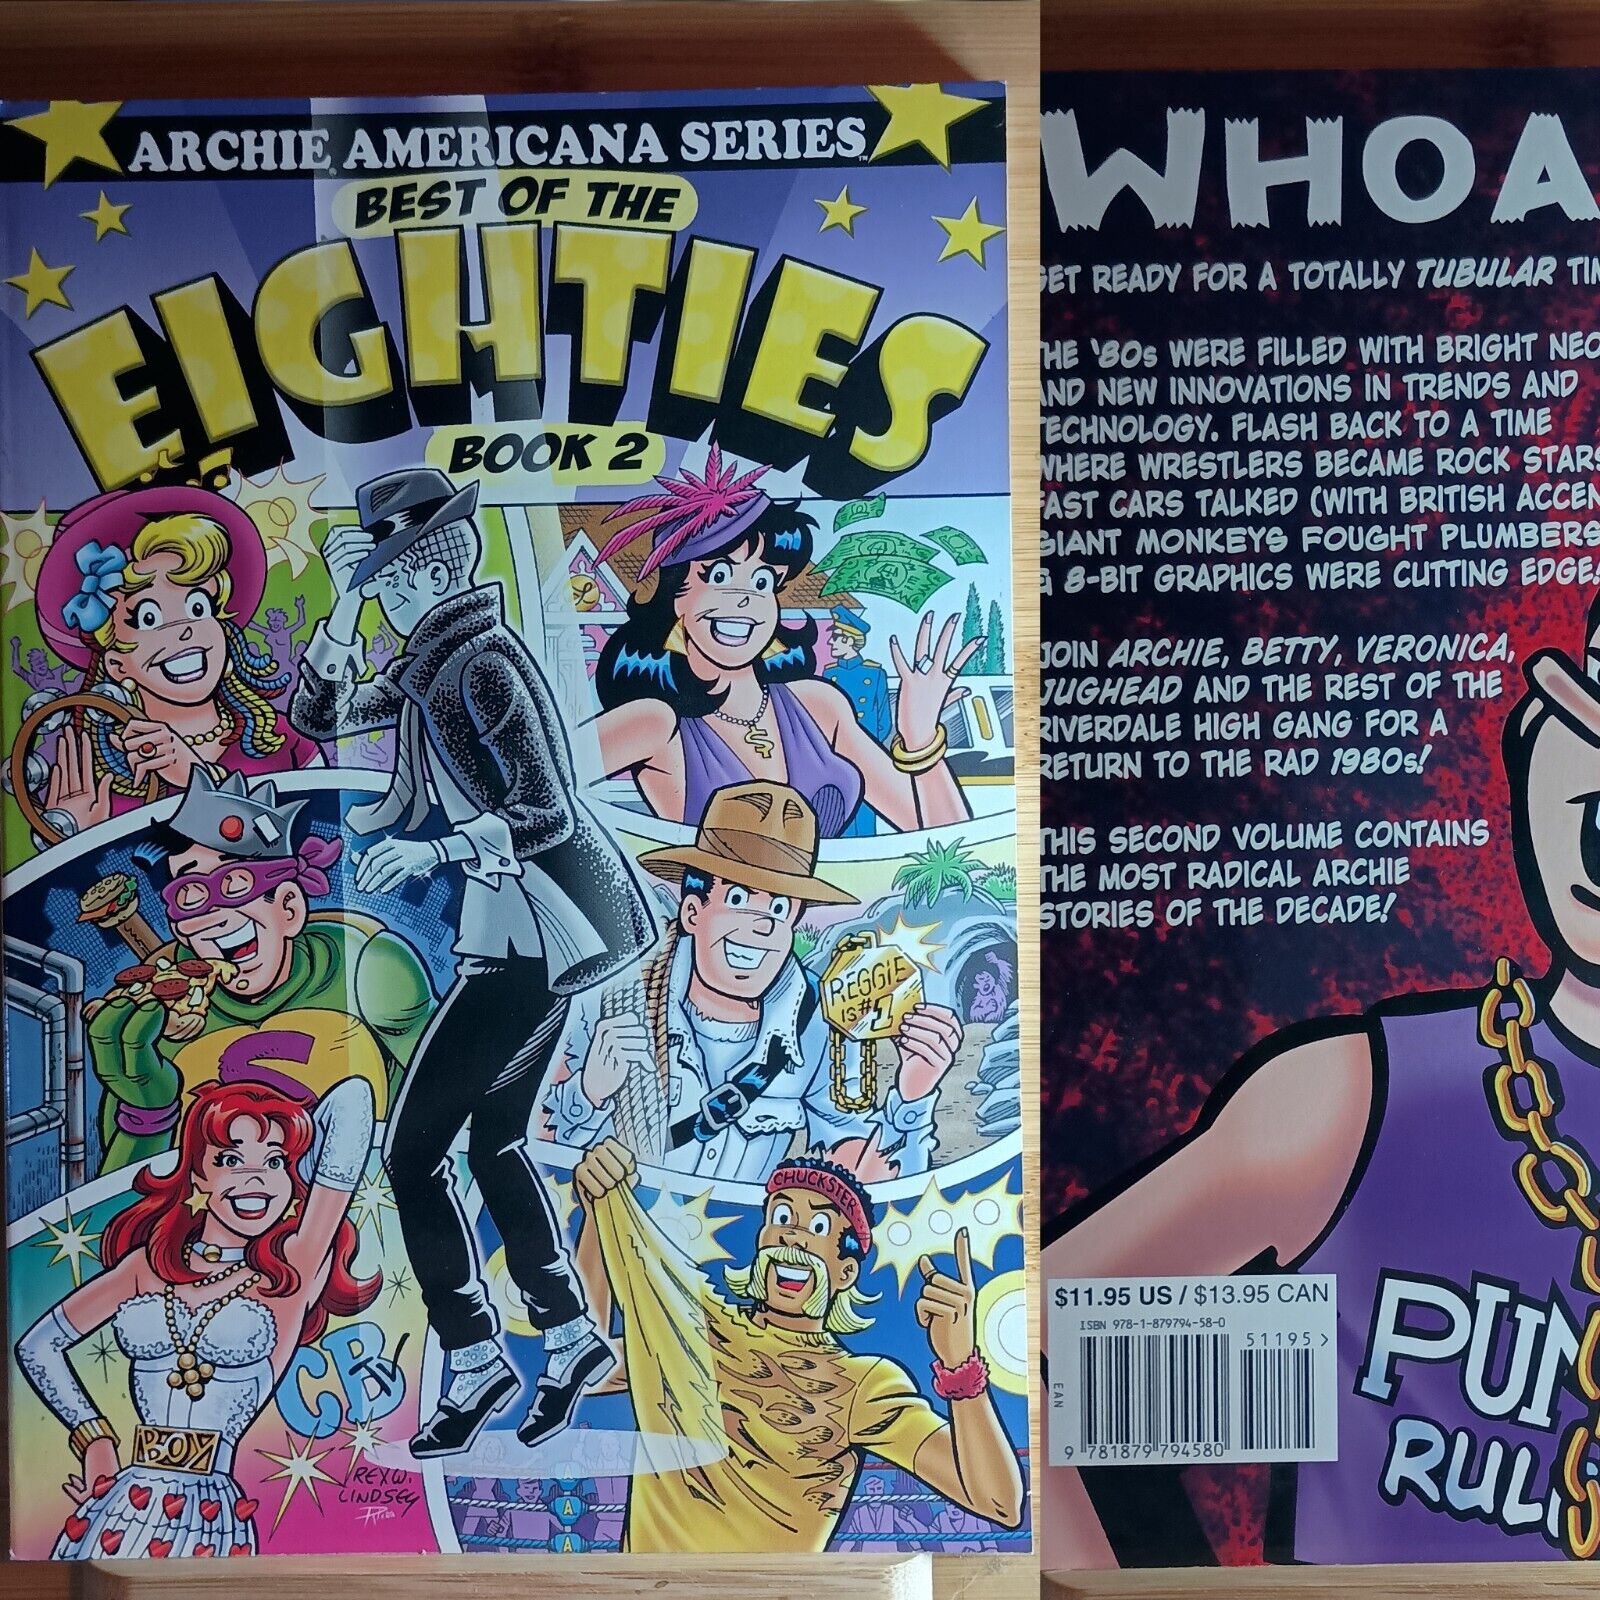 2010 Archie Comics Americana Series Best of the Eighties Book 2 TPB PNG